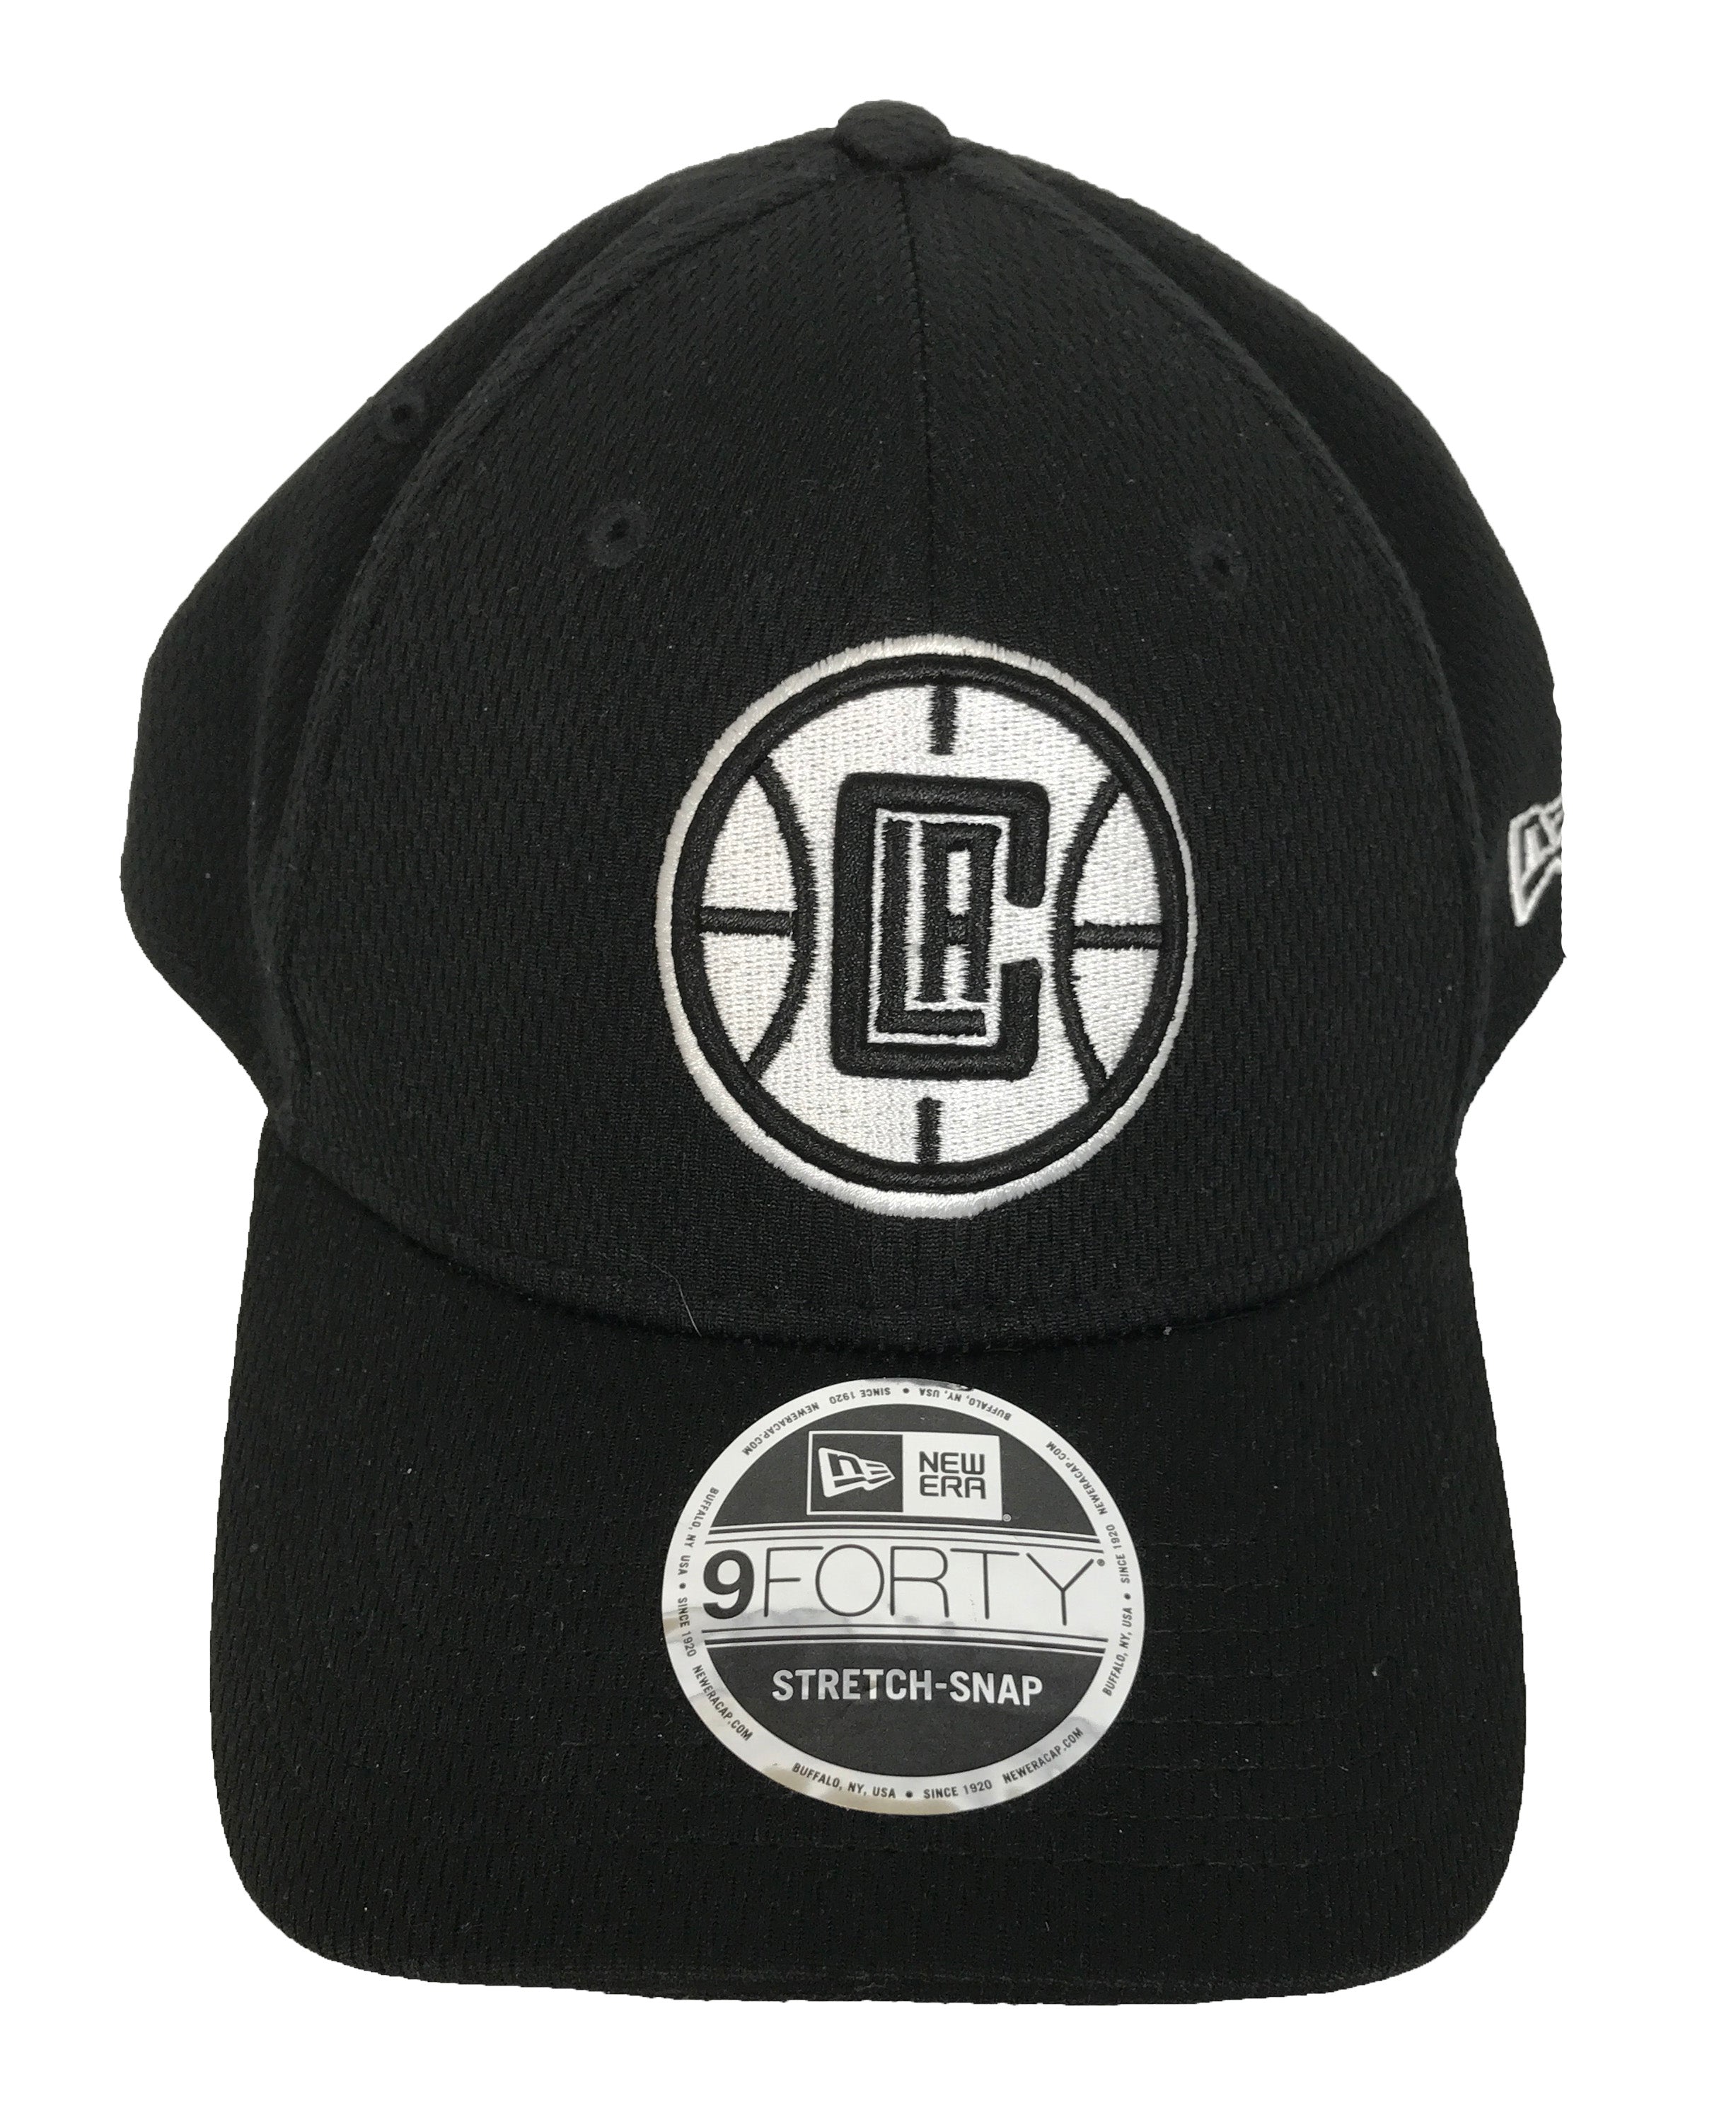 New Era Los Angeles Clippers Black Hat Unisex One Size